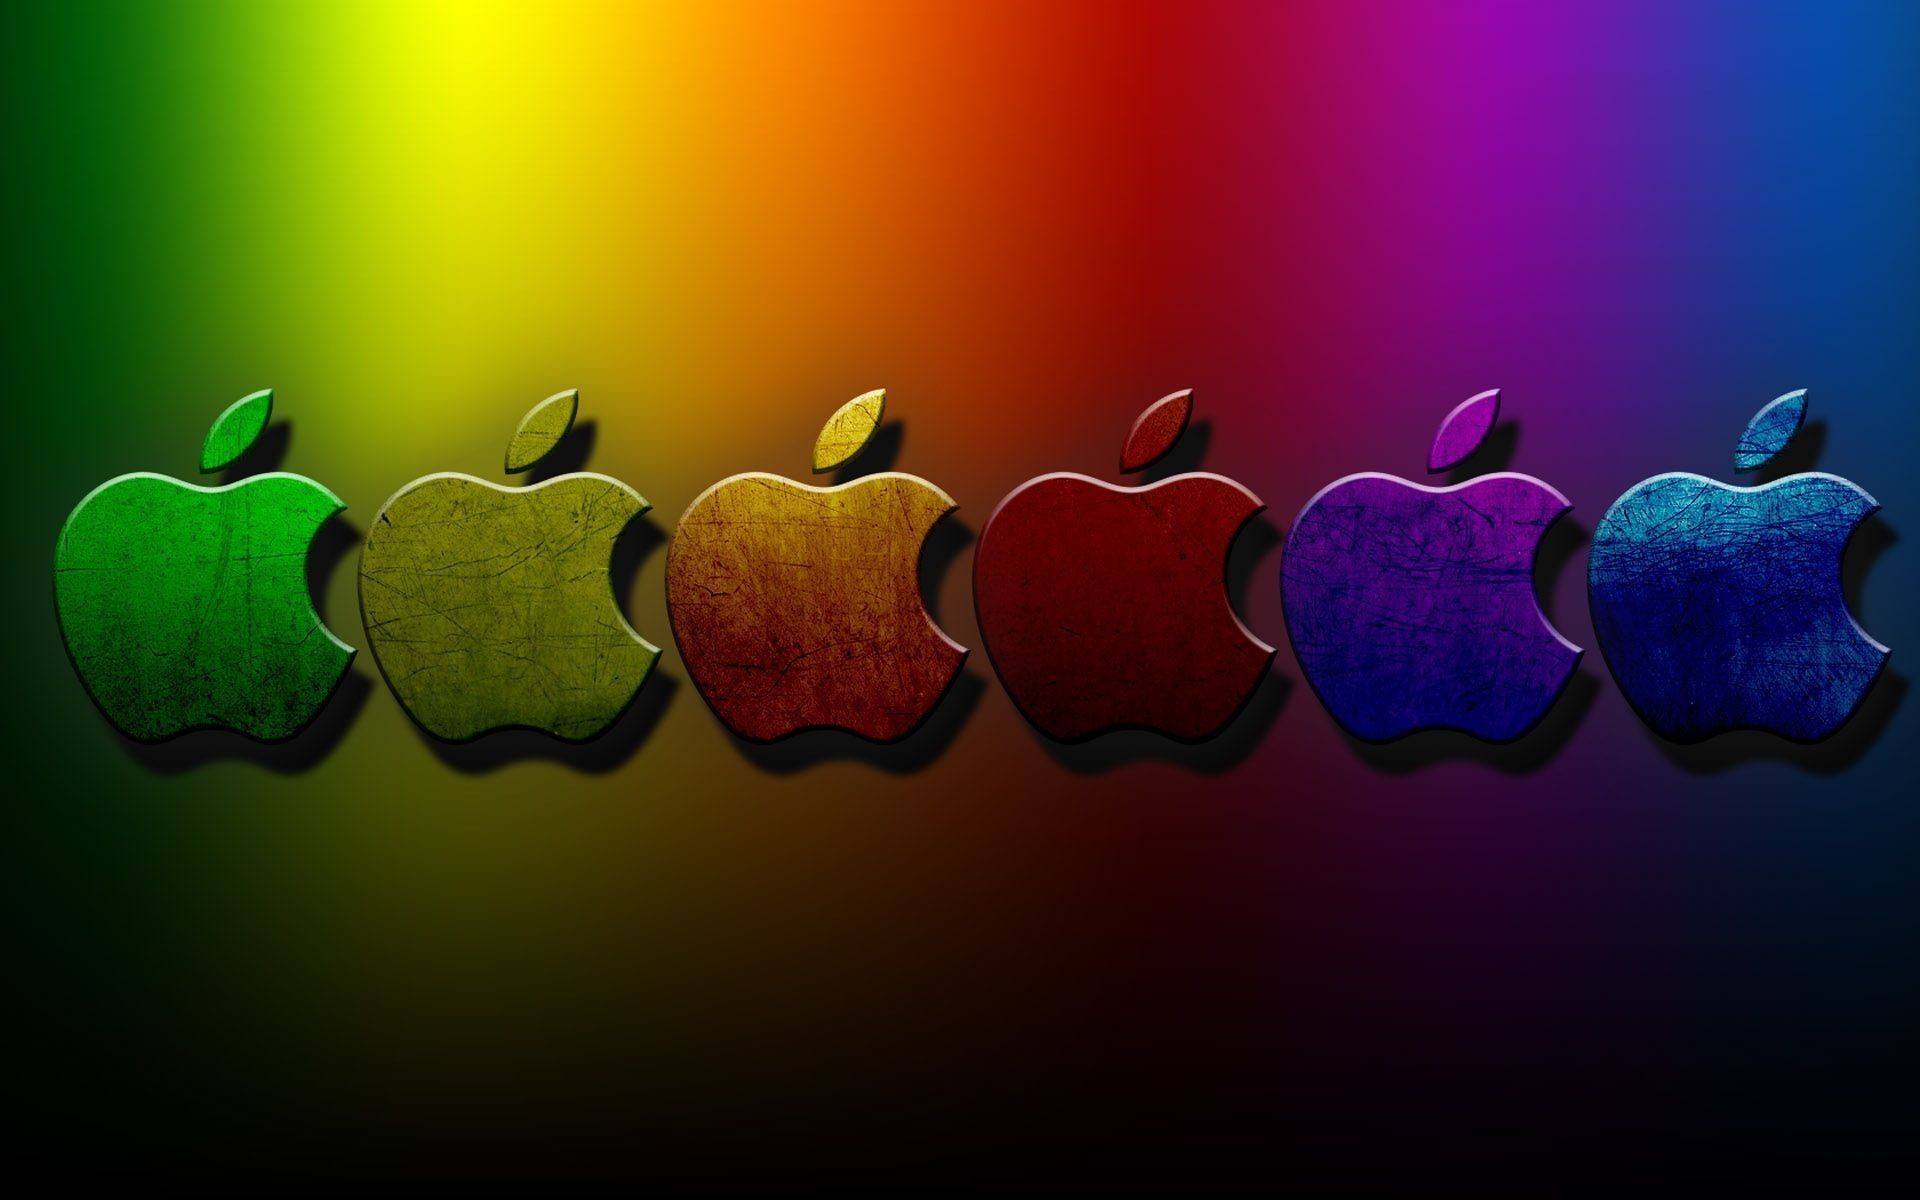 1920x1200 Top Download Colorful 3d Apple Images for Pinterest